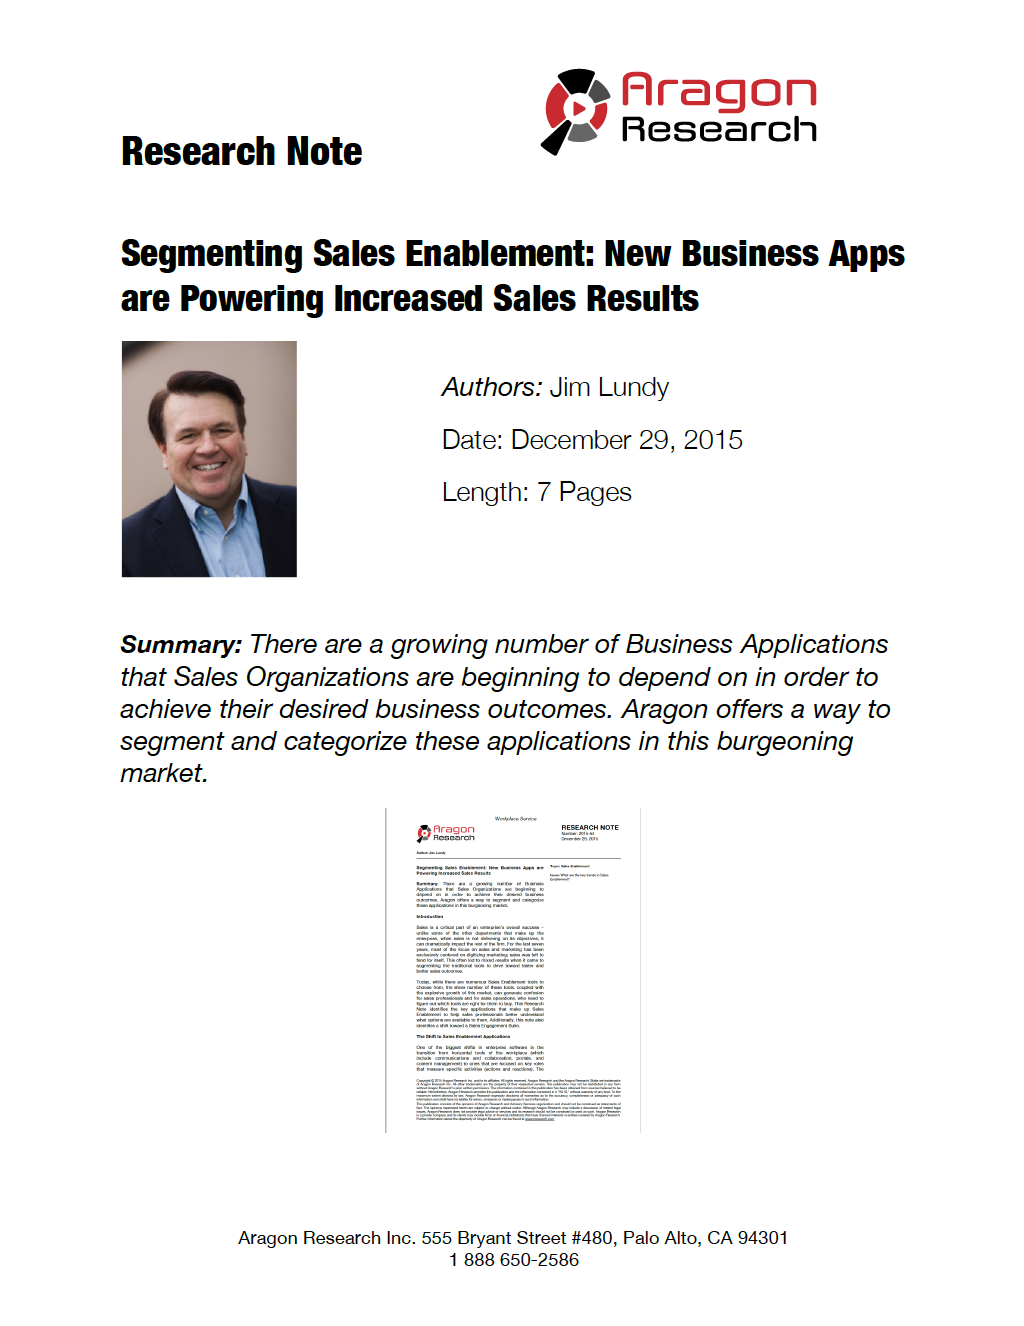 Segmenting Sales Enablement: New Business Apps are Powering Increased Sales Results